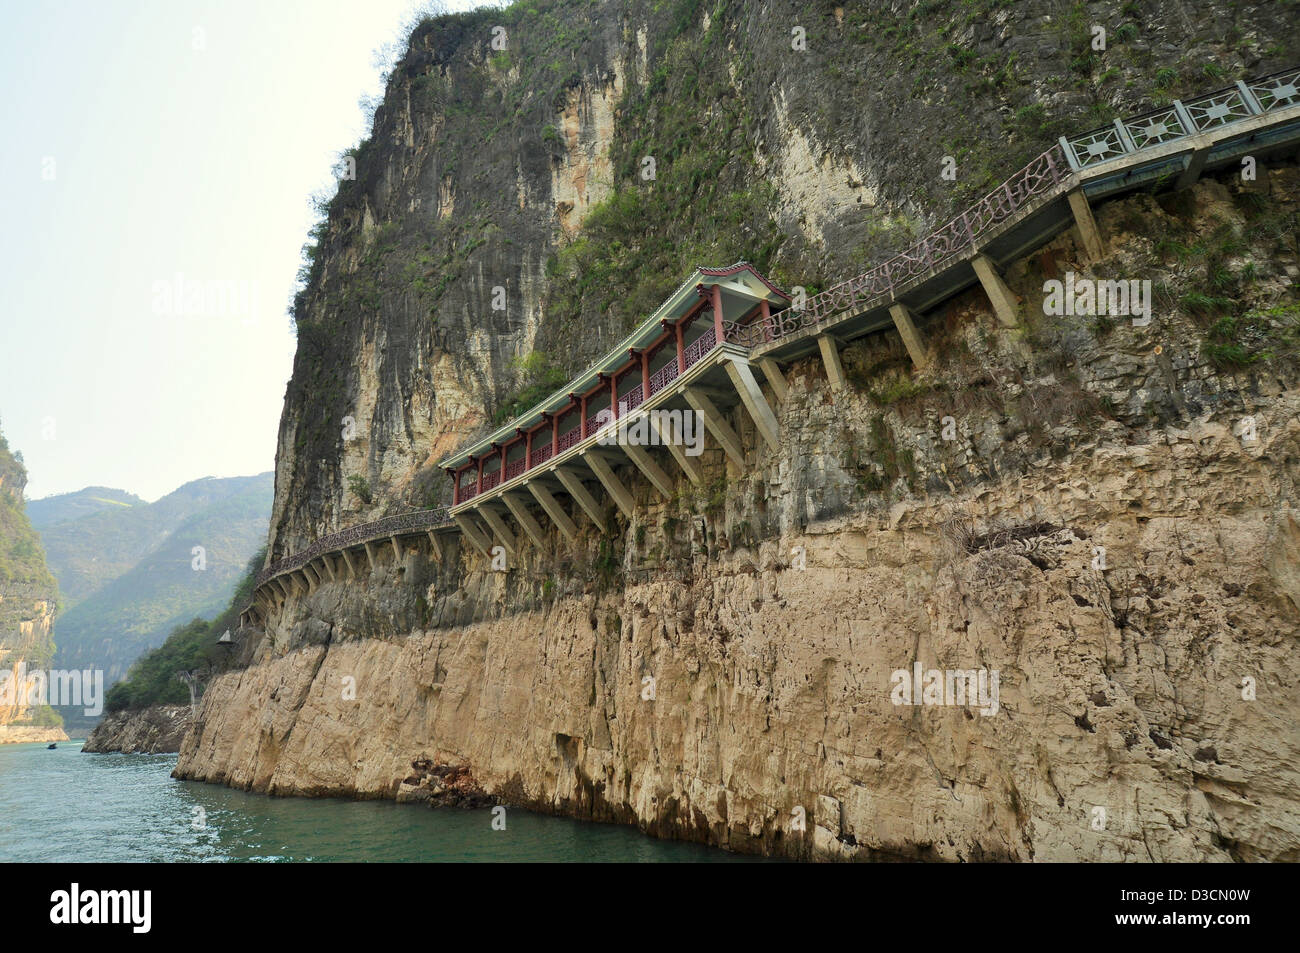 Walkway Built on Mountain Precipice in the Three Lesser Gorges - Wushan, Chongqing, China Stock Photo